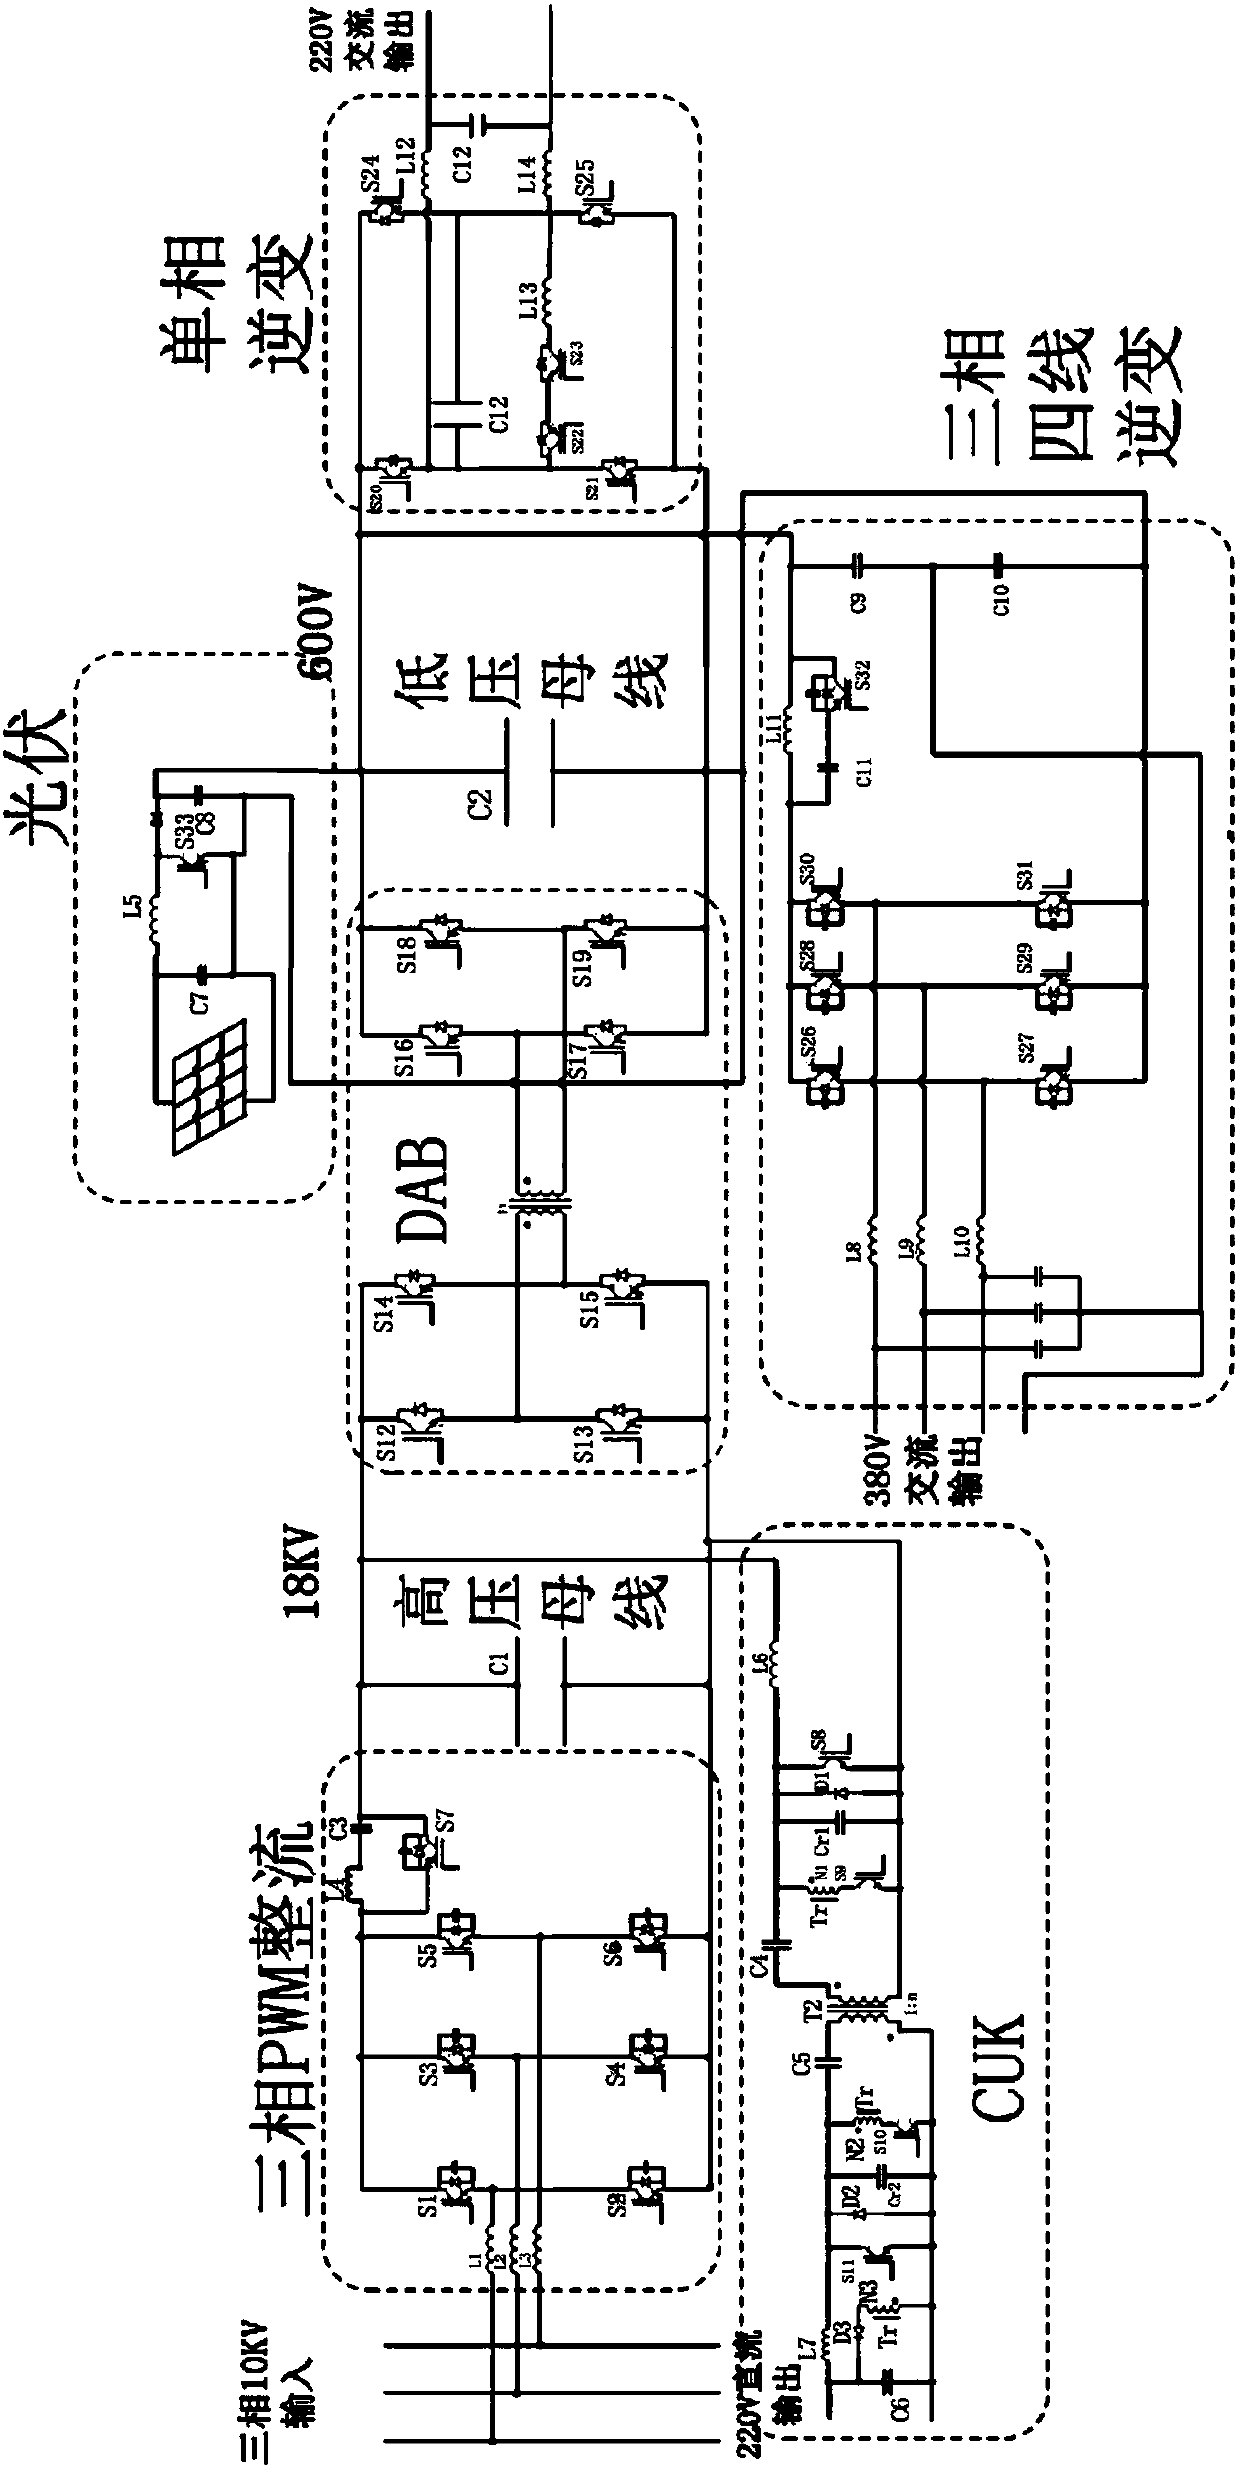 Energy router device applied to intelligent distributed energy network